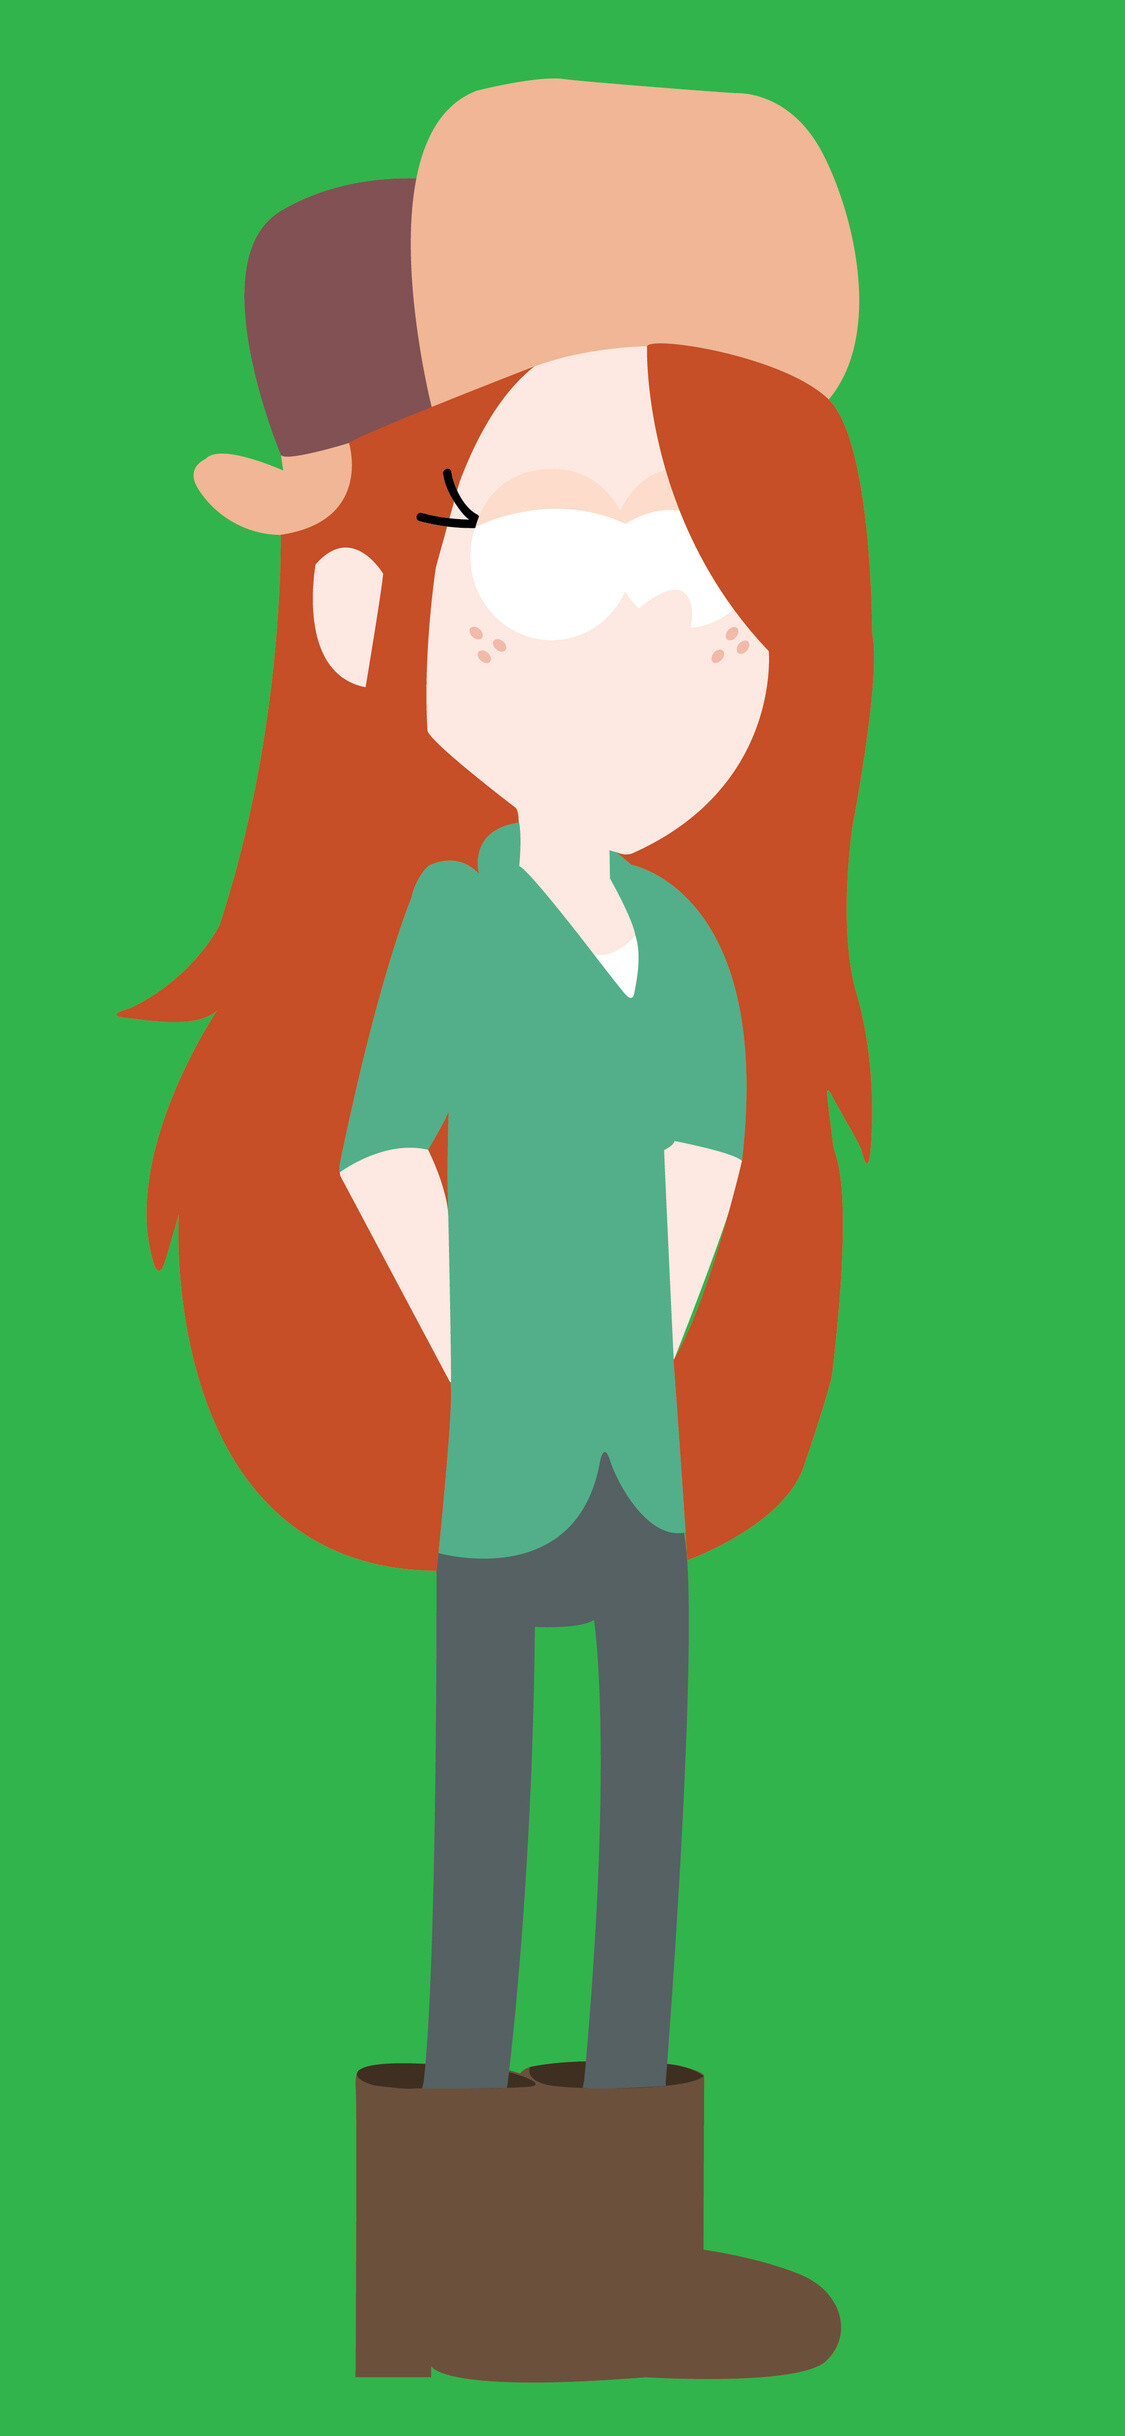 Gravity Falls: Wendy Corduroy, A 15-year-old part-time employee at the Mystery Shack, Minimalism. 1130x2440 HD Wallpaper.